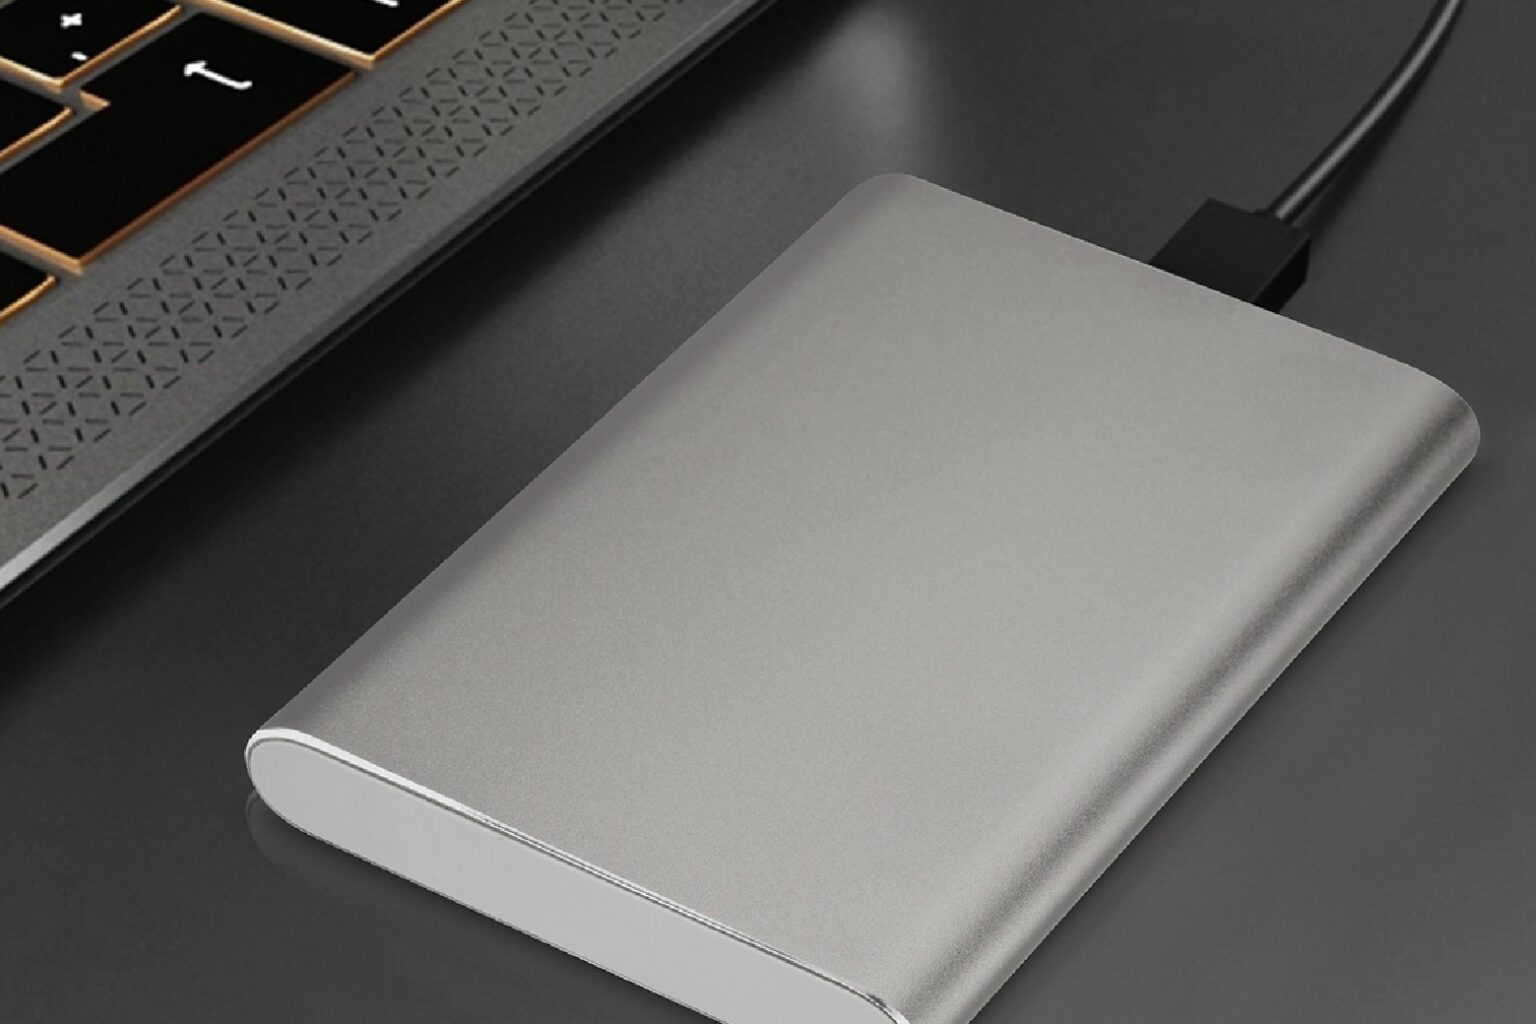 Clear space and store important files with this $57 1TB external hard drive.